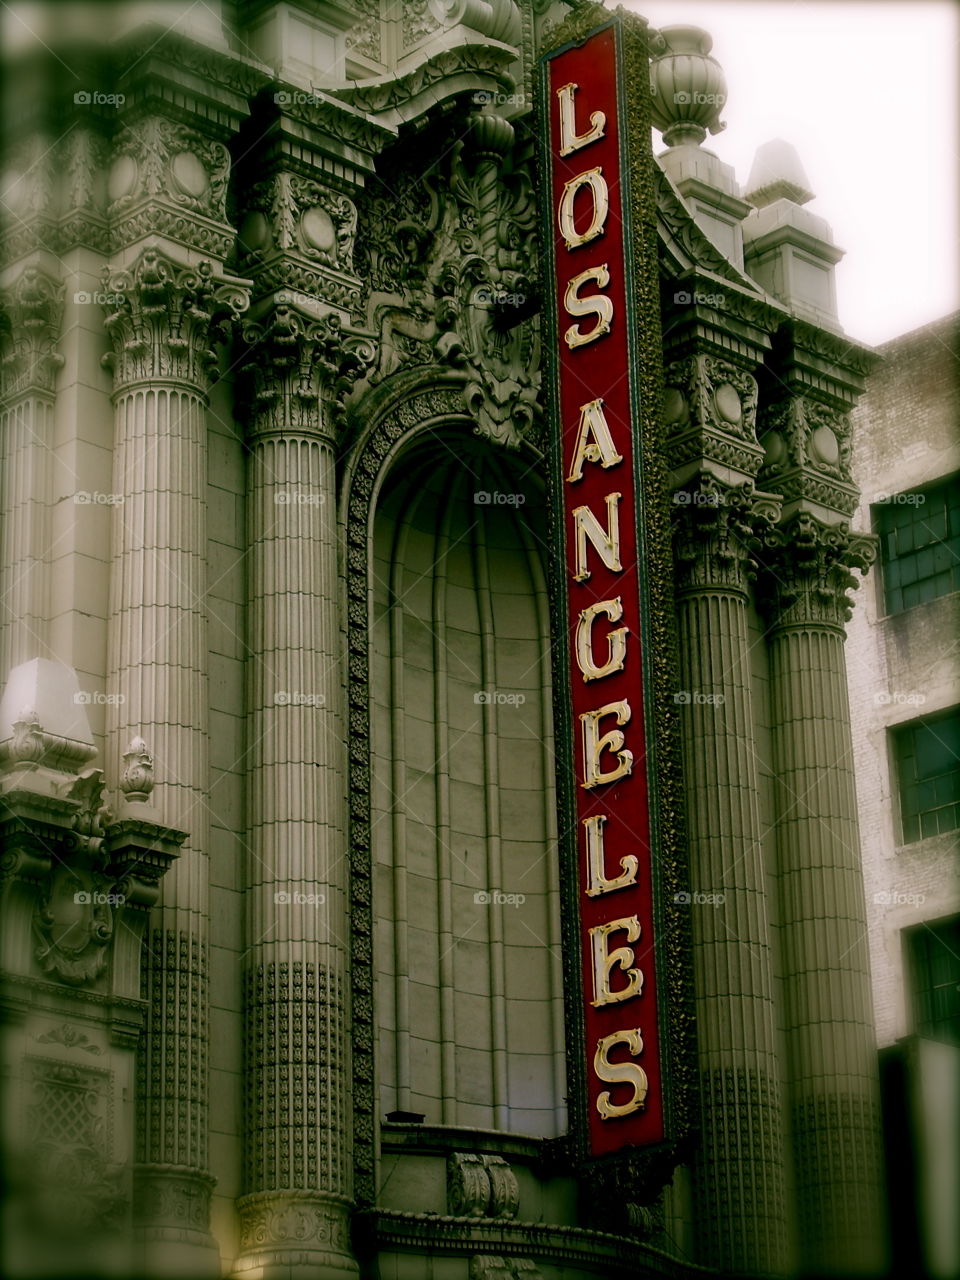 The Los Angeles Theater / Downtown LA